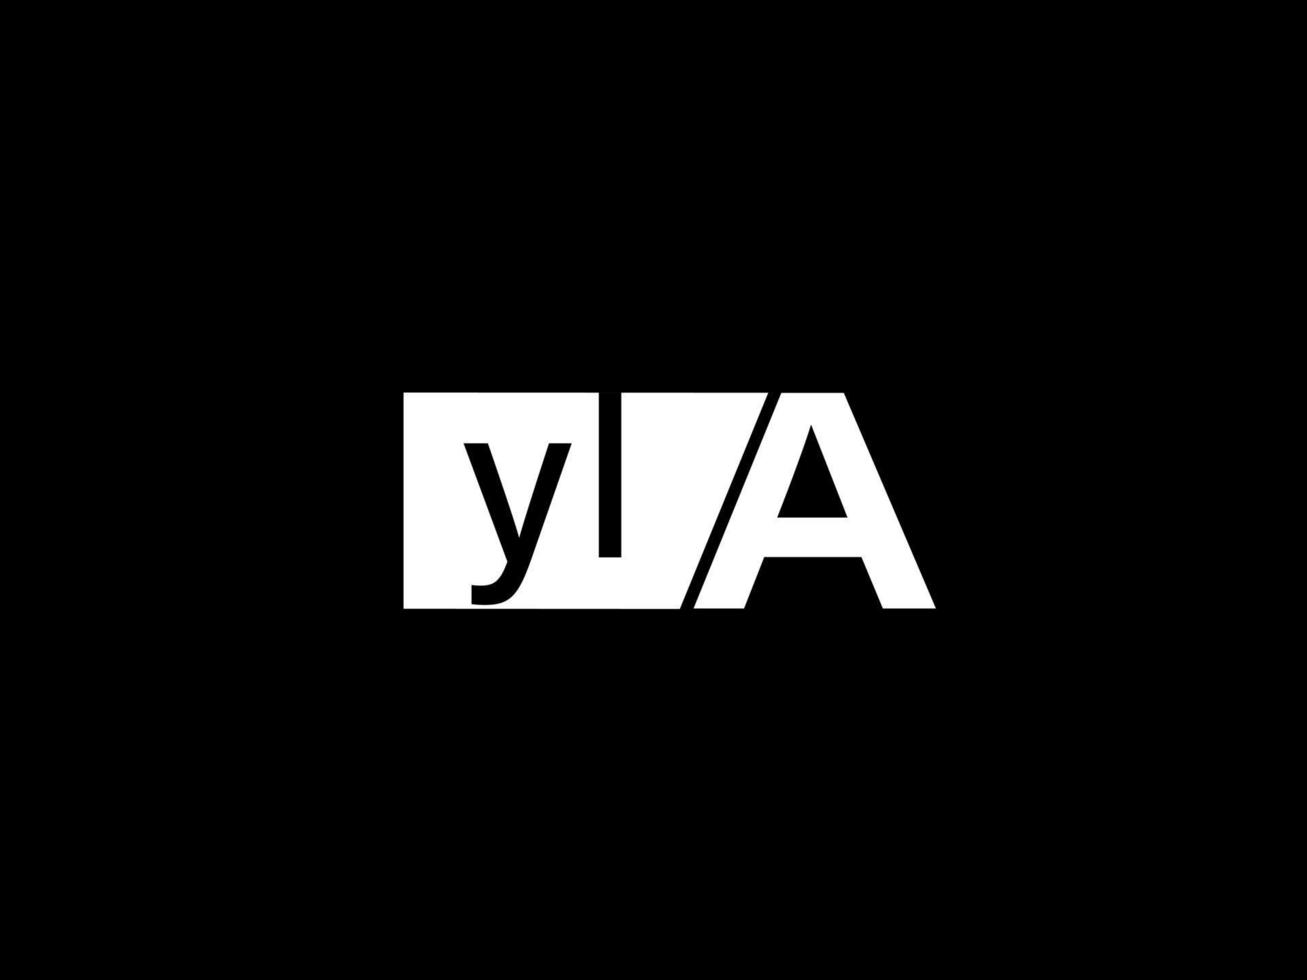 YLA Logo and Graphics design vector art, Icons isolated on black background